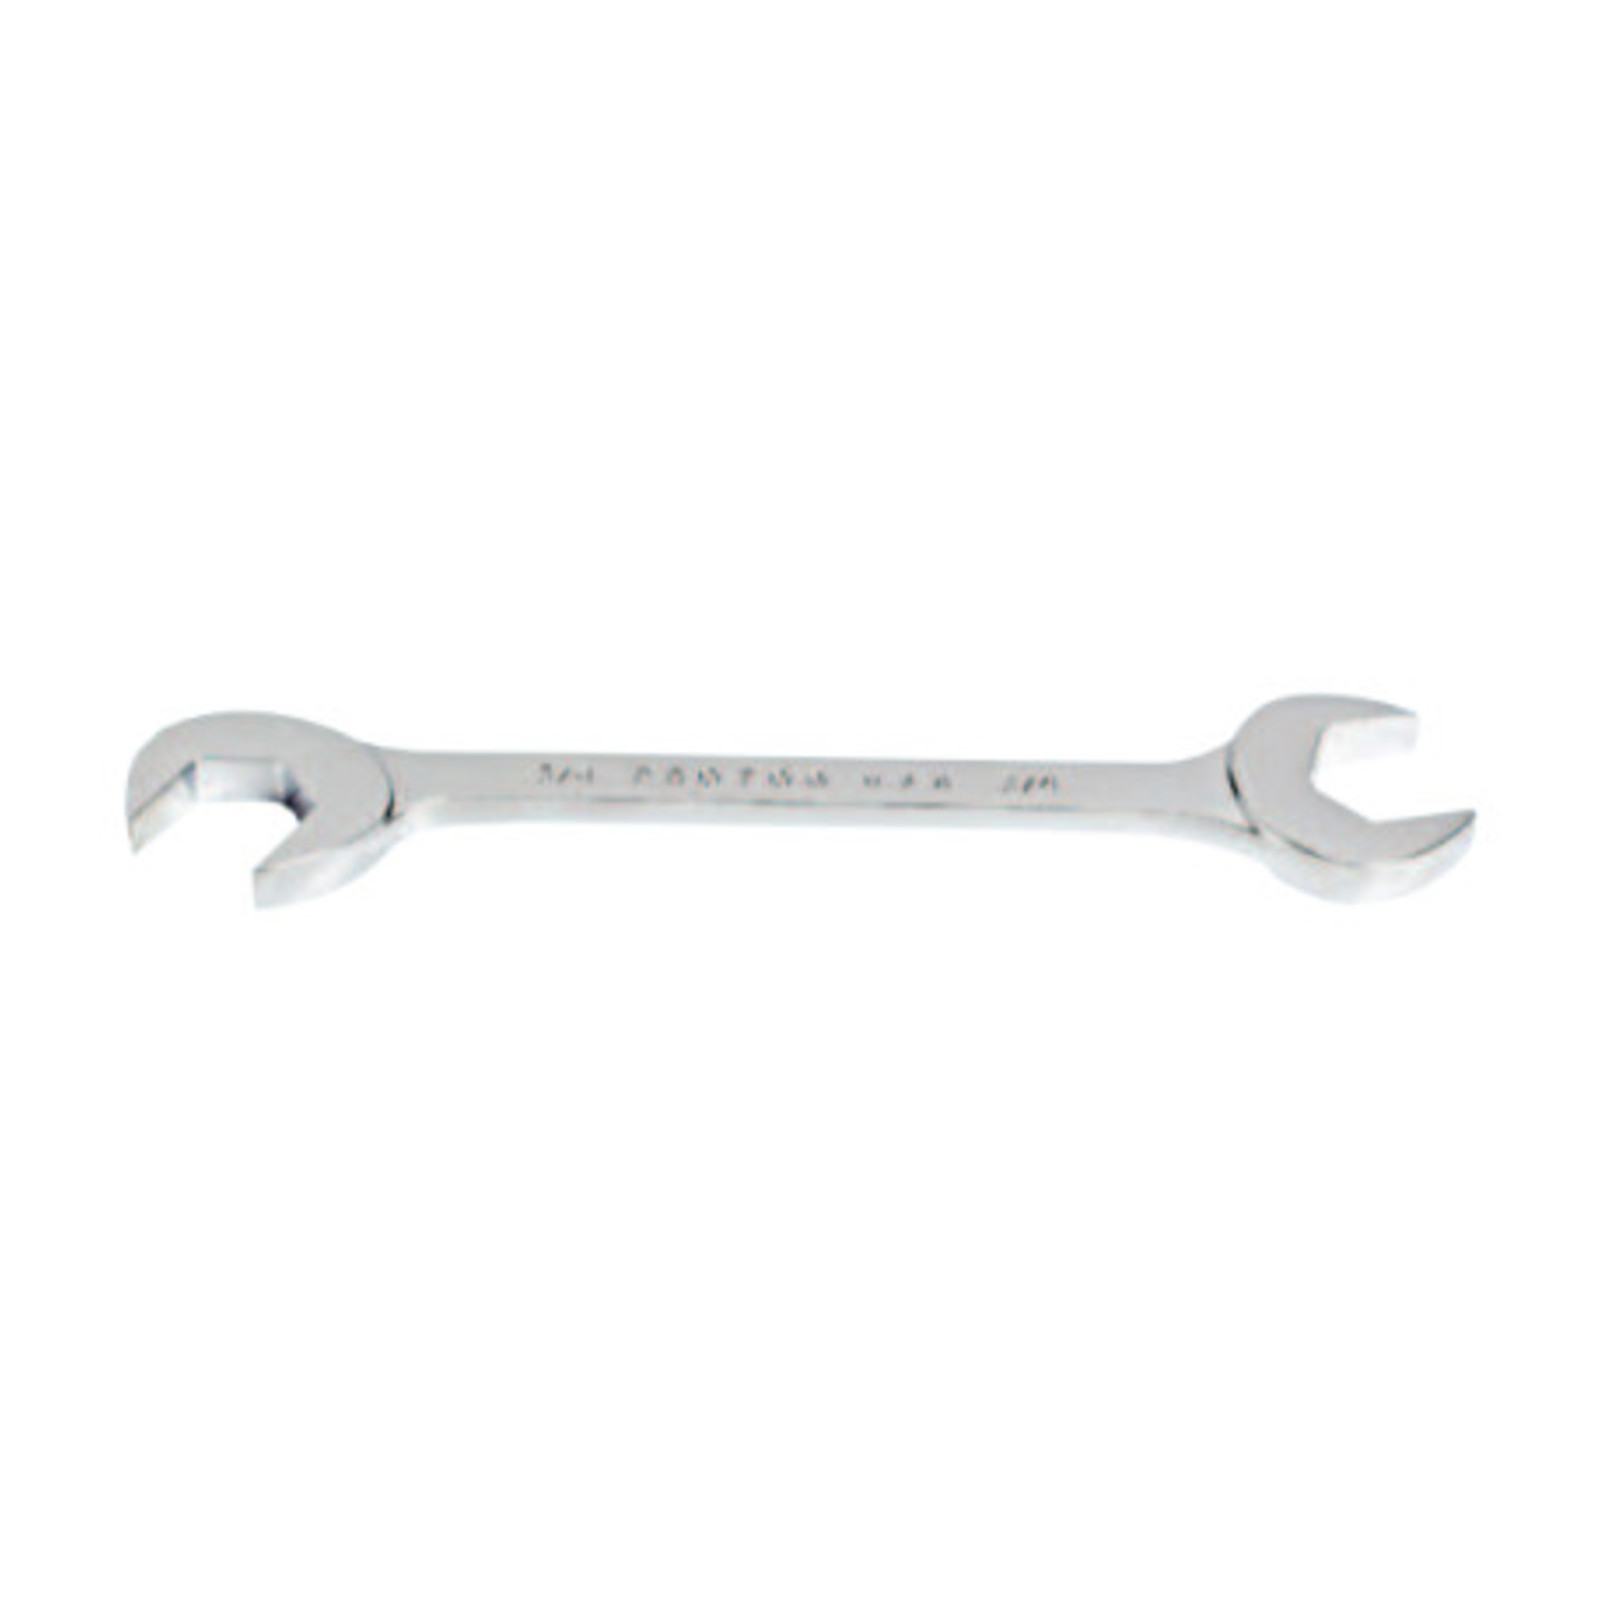 Stanley Proto - 5/8 Inch, Chrome Finish, Open End Wrench 6 Inch Overall Length, Double End Head, 15 and 60 Head Angle